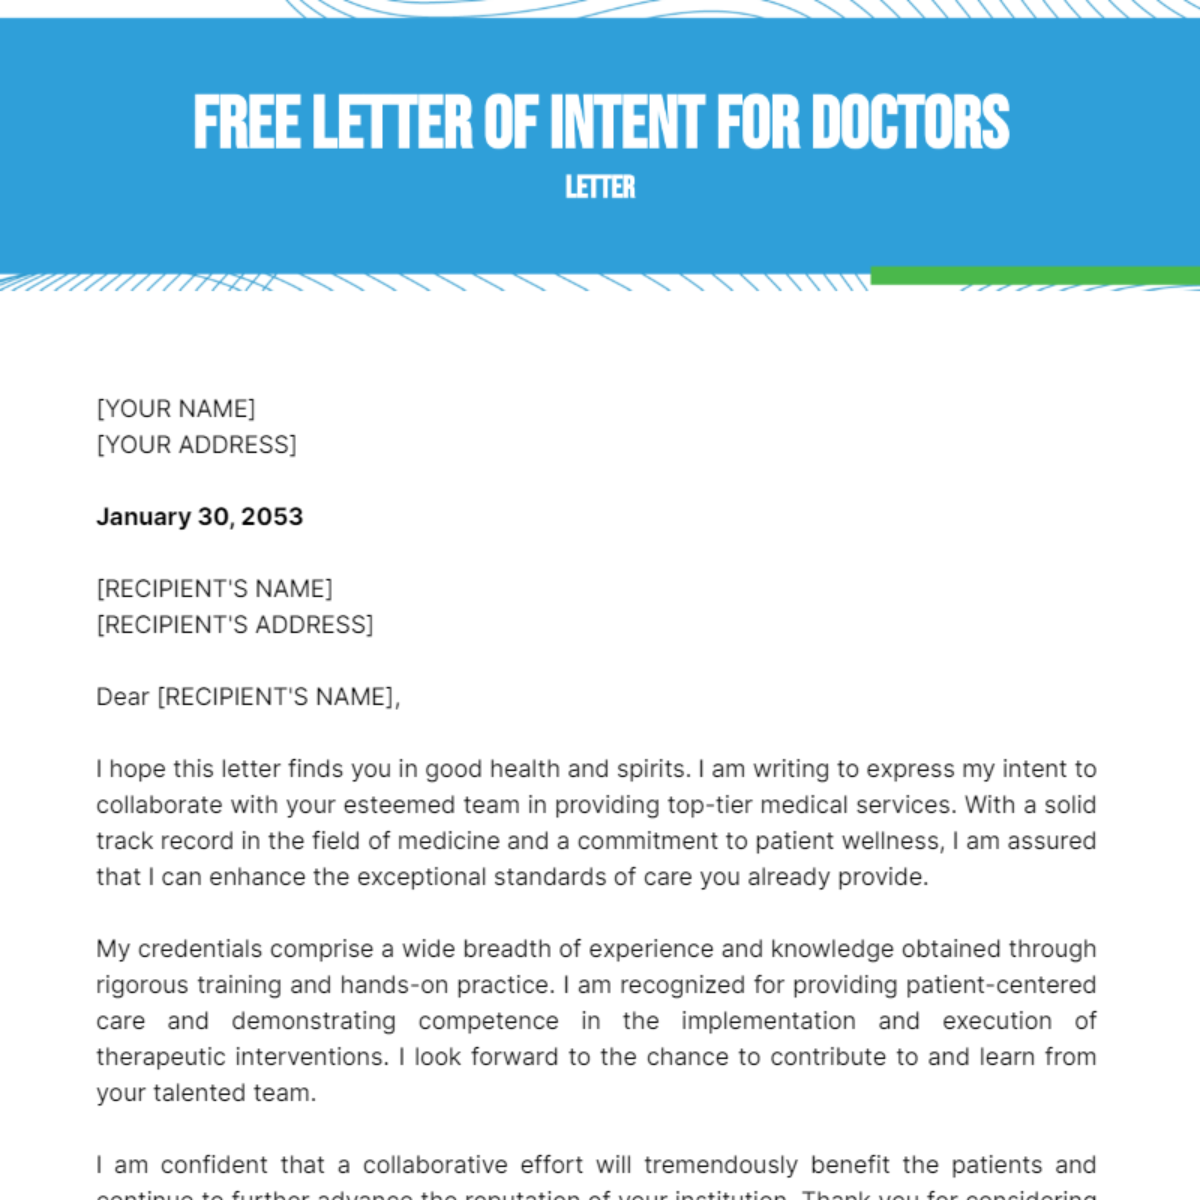 Letter of Intent for Doctors Template